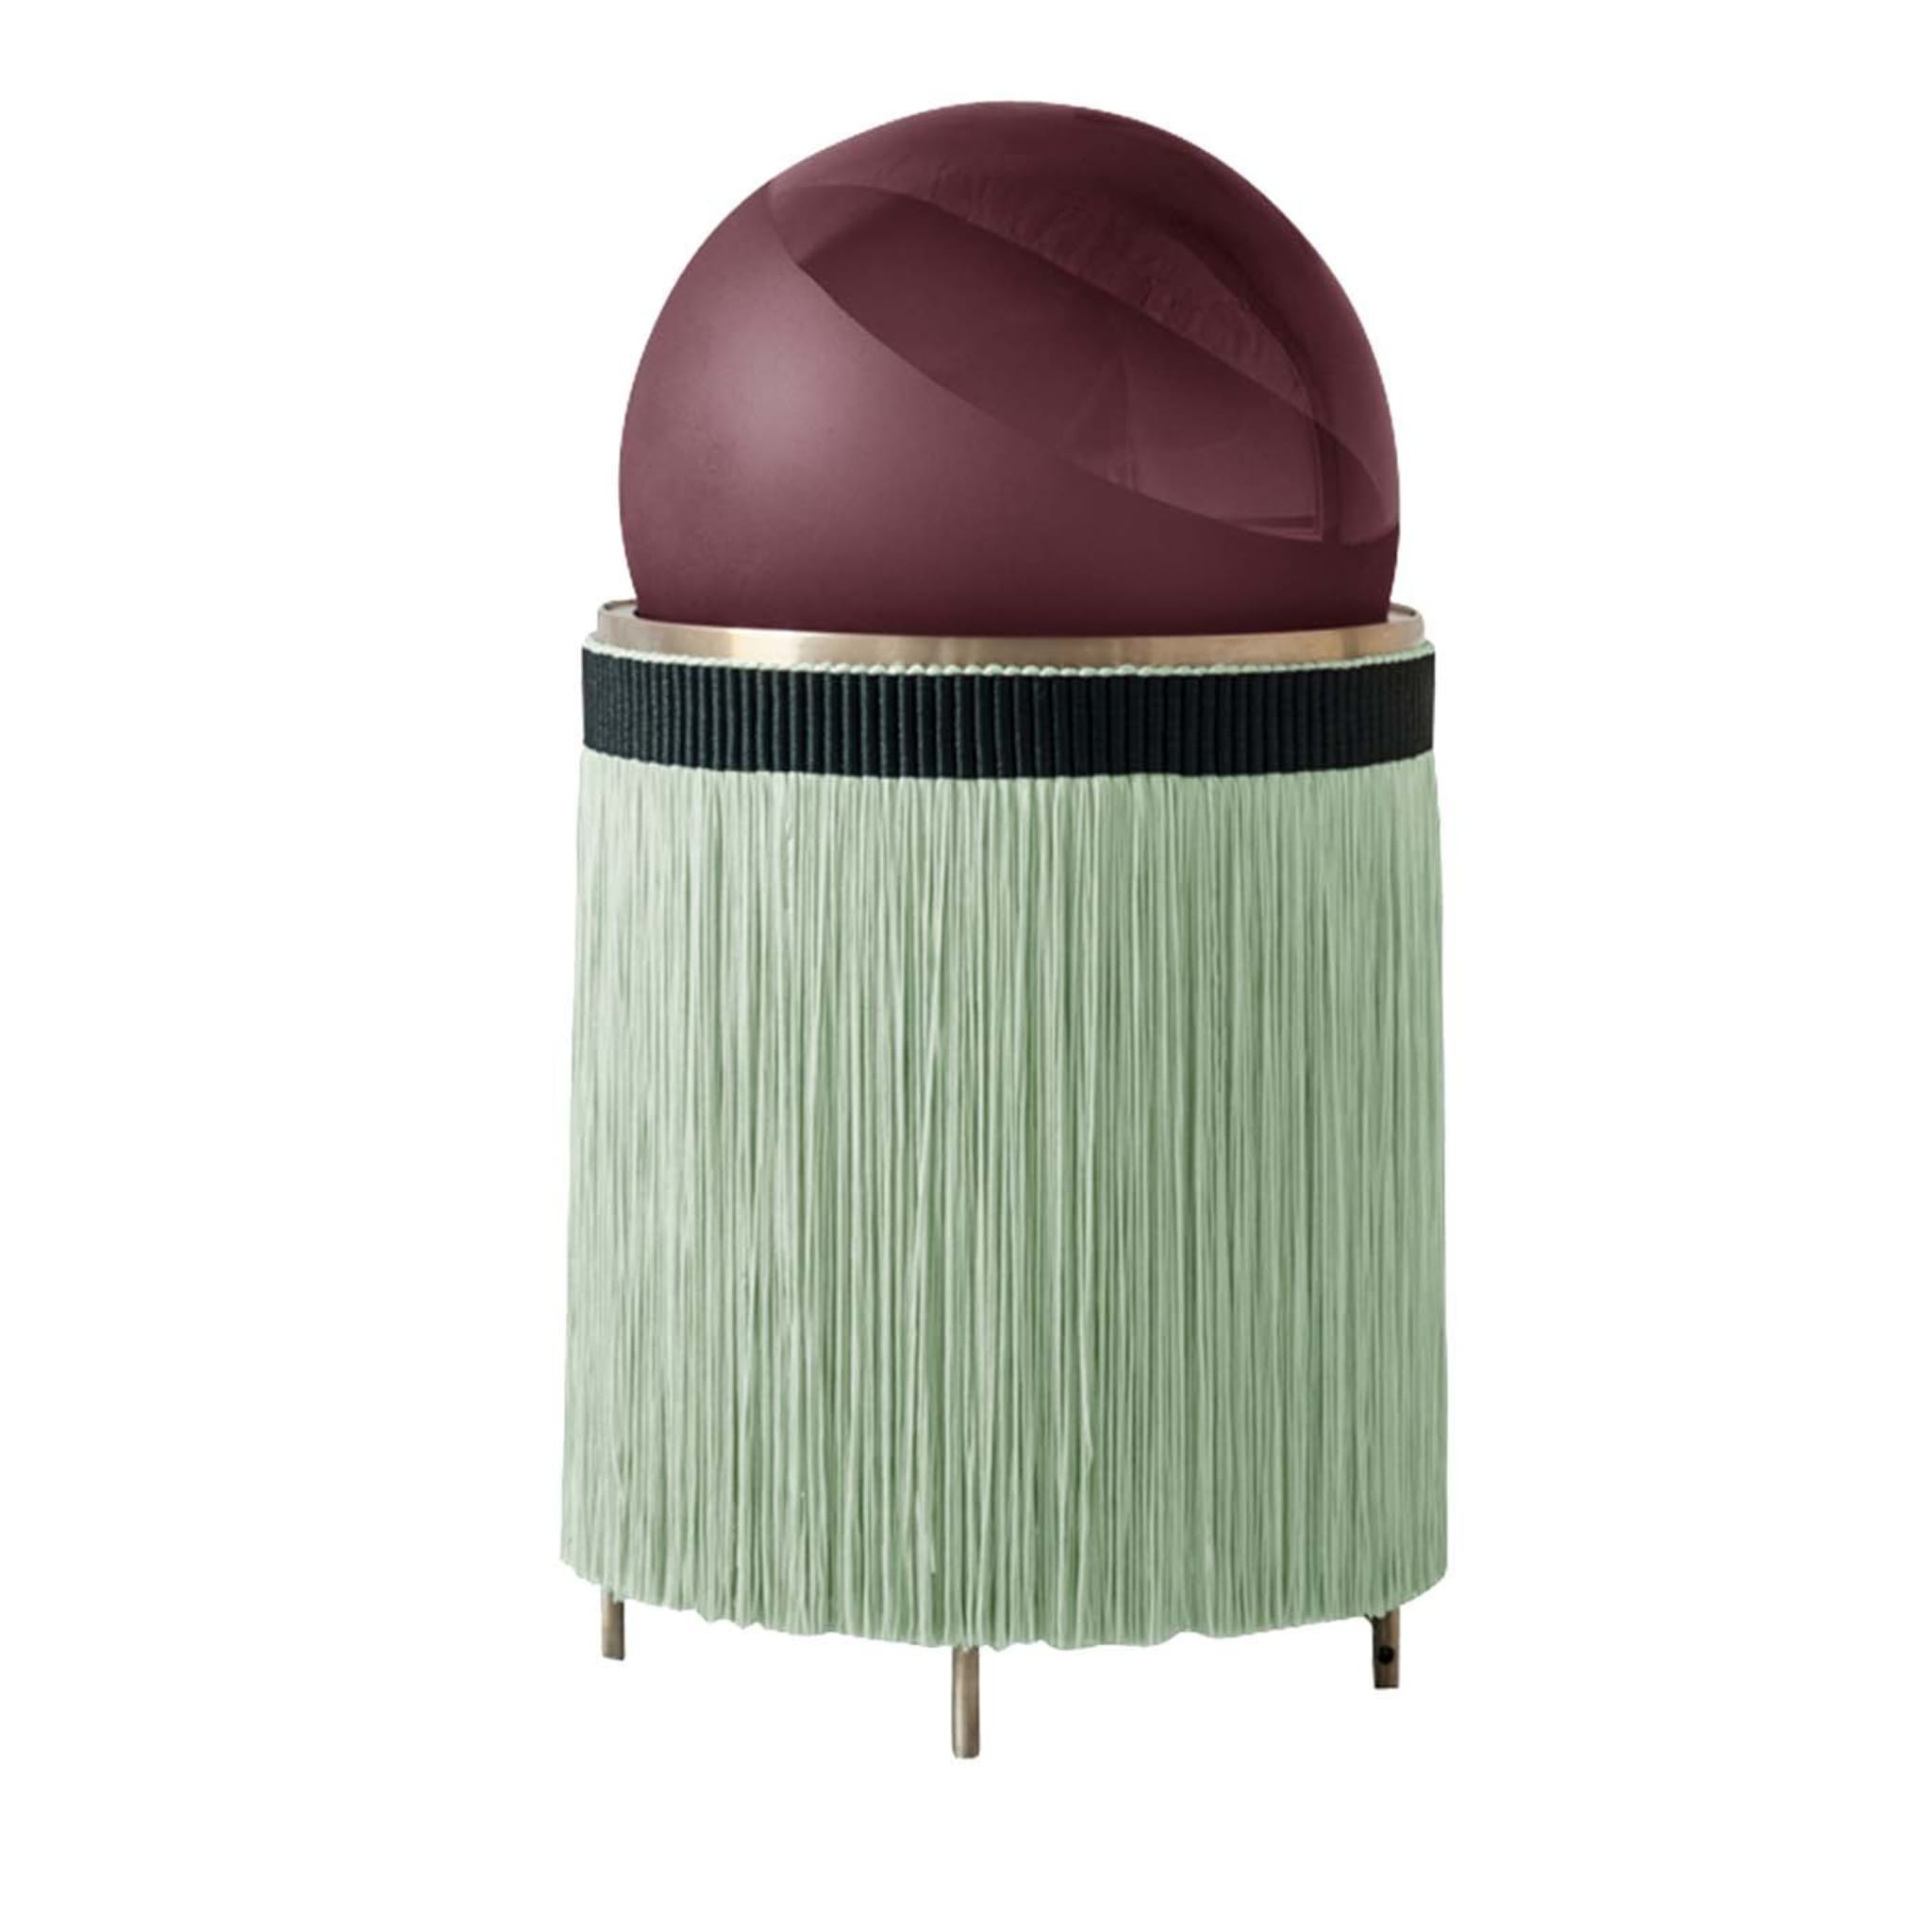 Normanna Floor Lamp in Amethyst Pink and Green by Vi+M - Main view